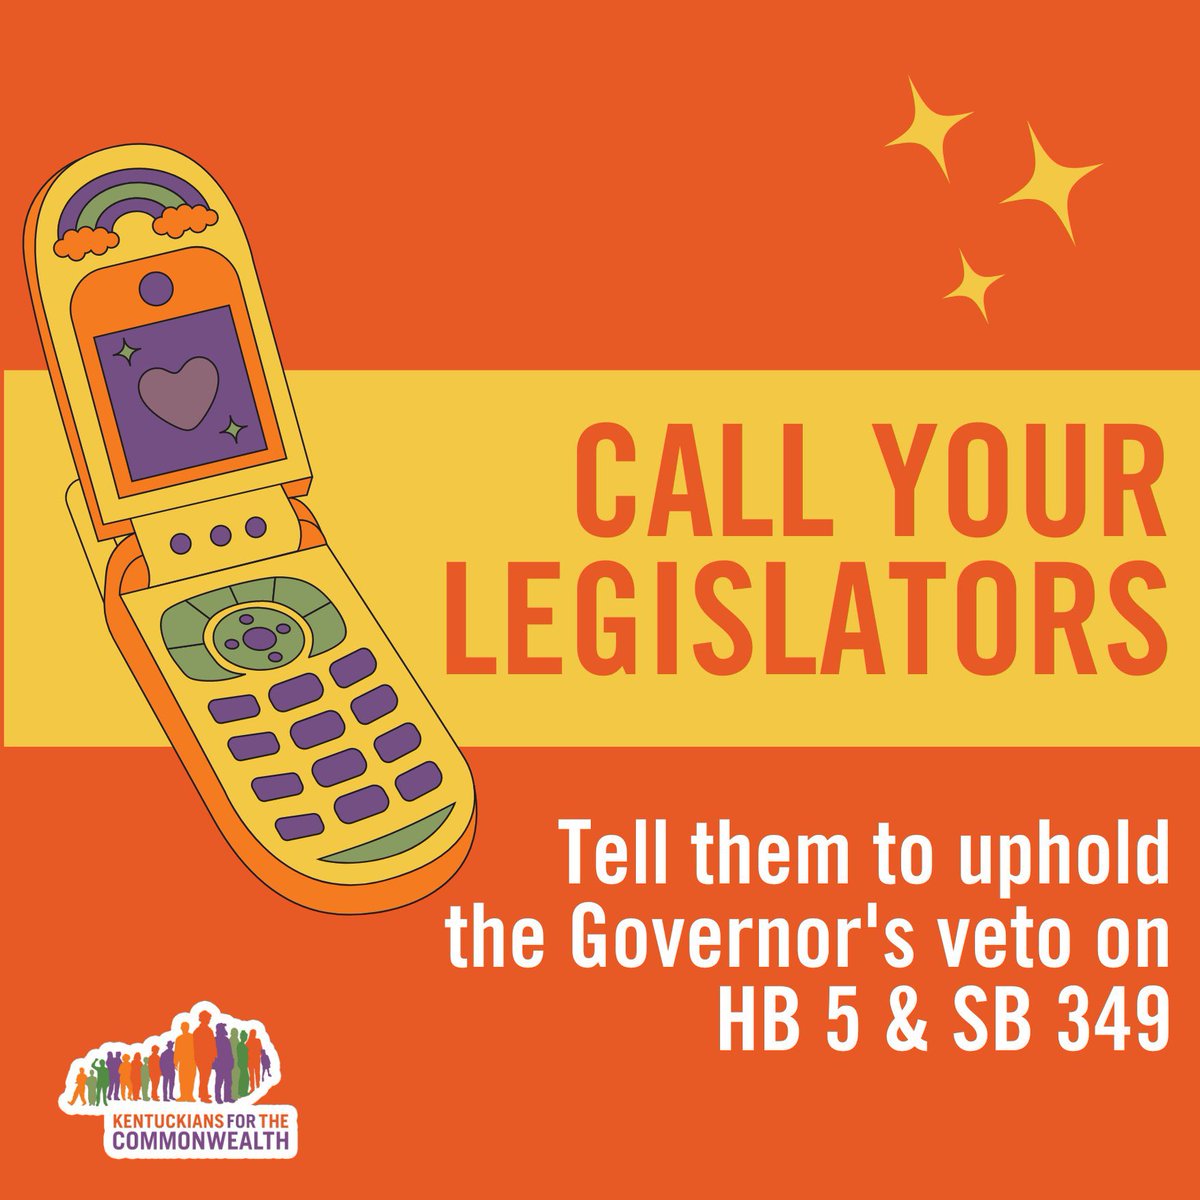 🚨URGENT ACTION NEEDED🚨Call your legislators NOW and demand they uphold the Governor's veto on HB 5 & SB 349! Your voice matters - make it heard! Call the Legislative Message Line at 1-800-372-7181 or En Español 1-866-840-6574 You have until 6PM tonight to call!